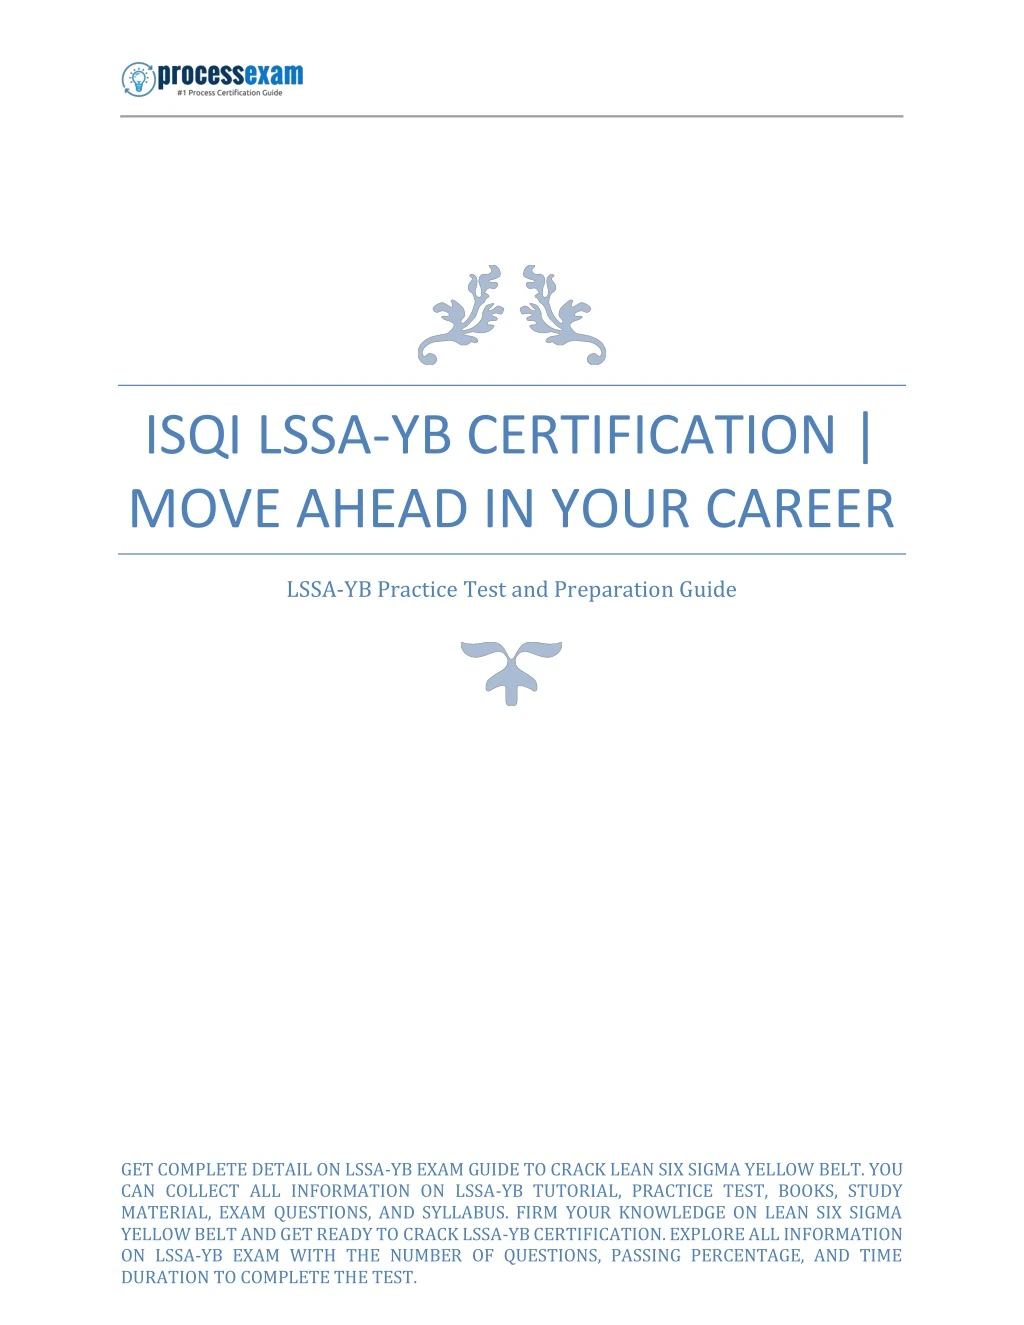 isqi lssa yb certification move ahead in your